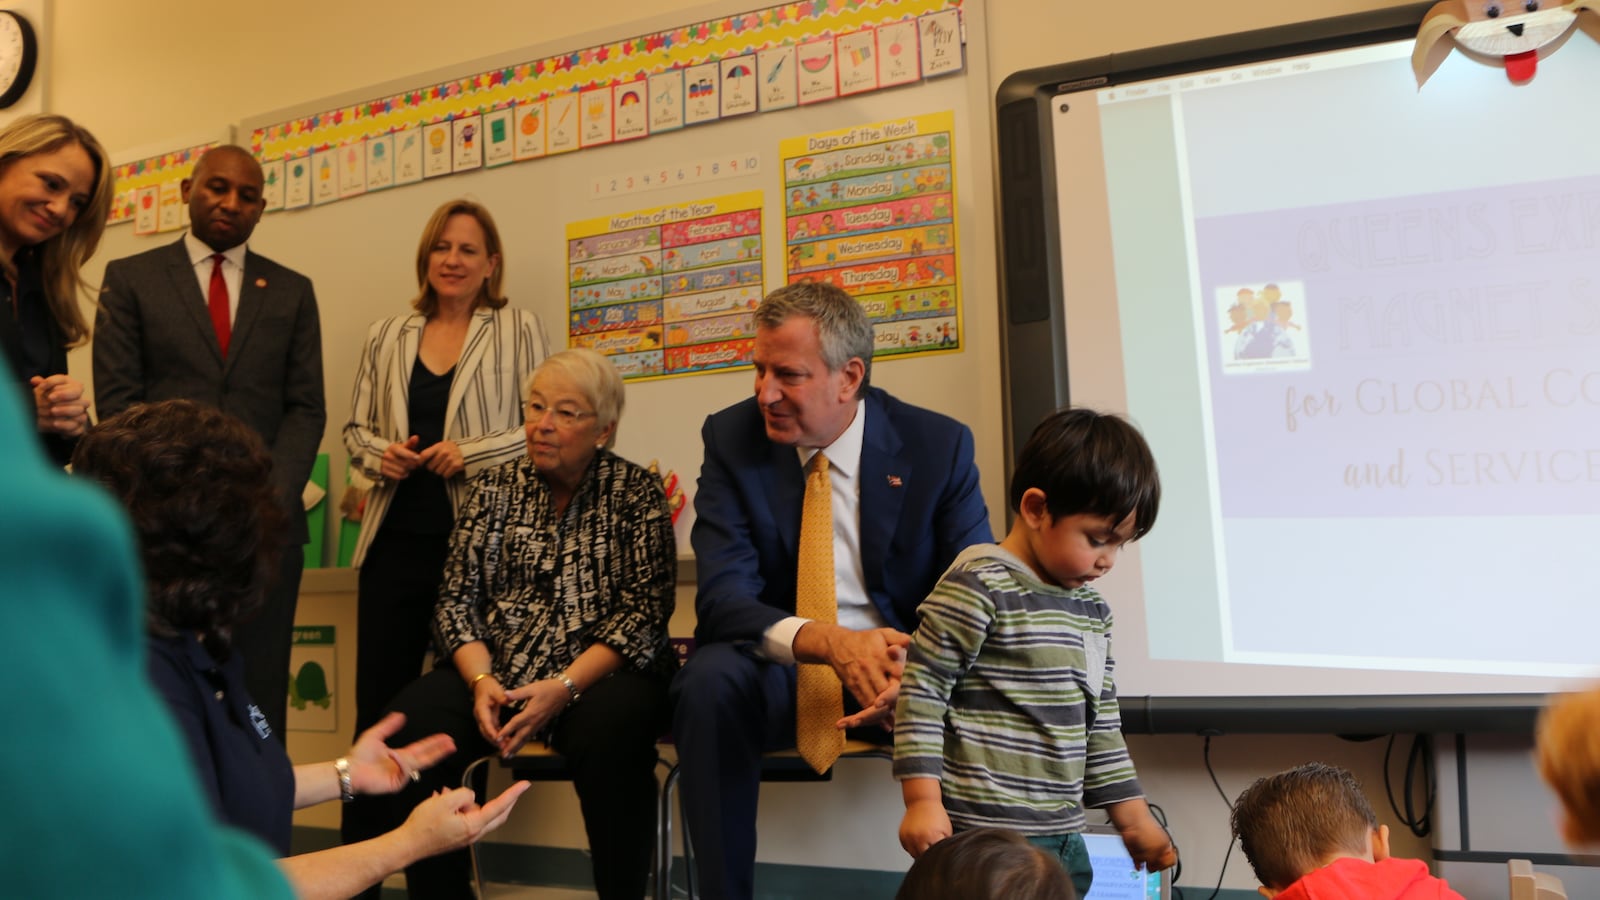 Schools Chancellor Carmen Fariña, left, and Mayor Bill de Blasio, center, visited a "Mommy and Me" class in District 27 in Queens, where the city is set to expand 3-K For All.